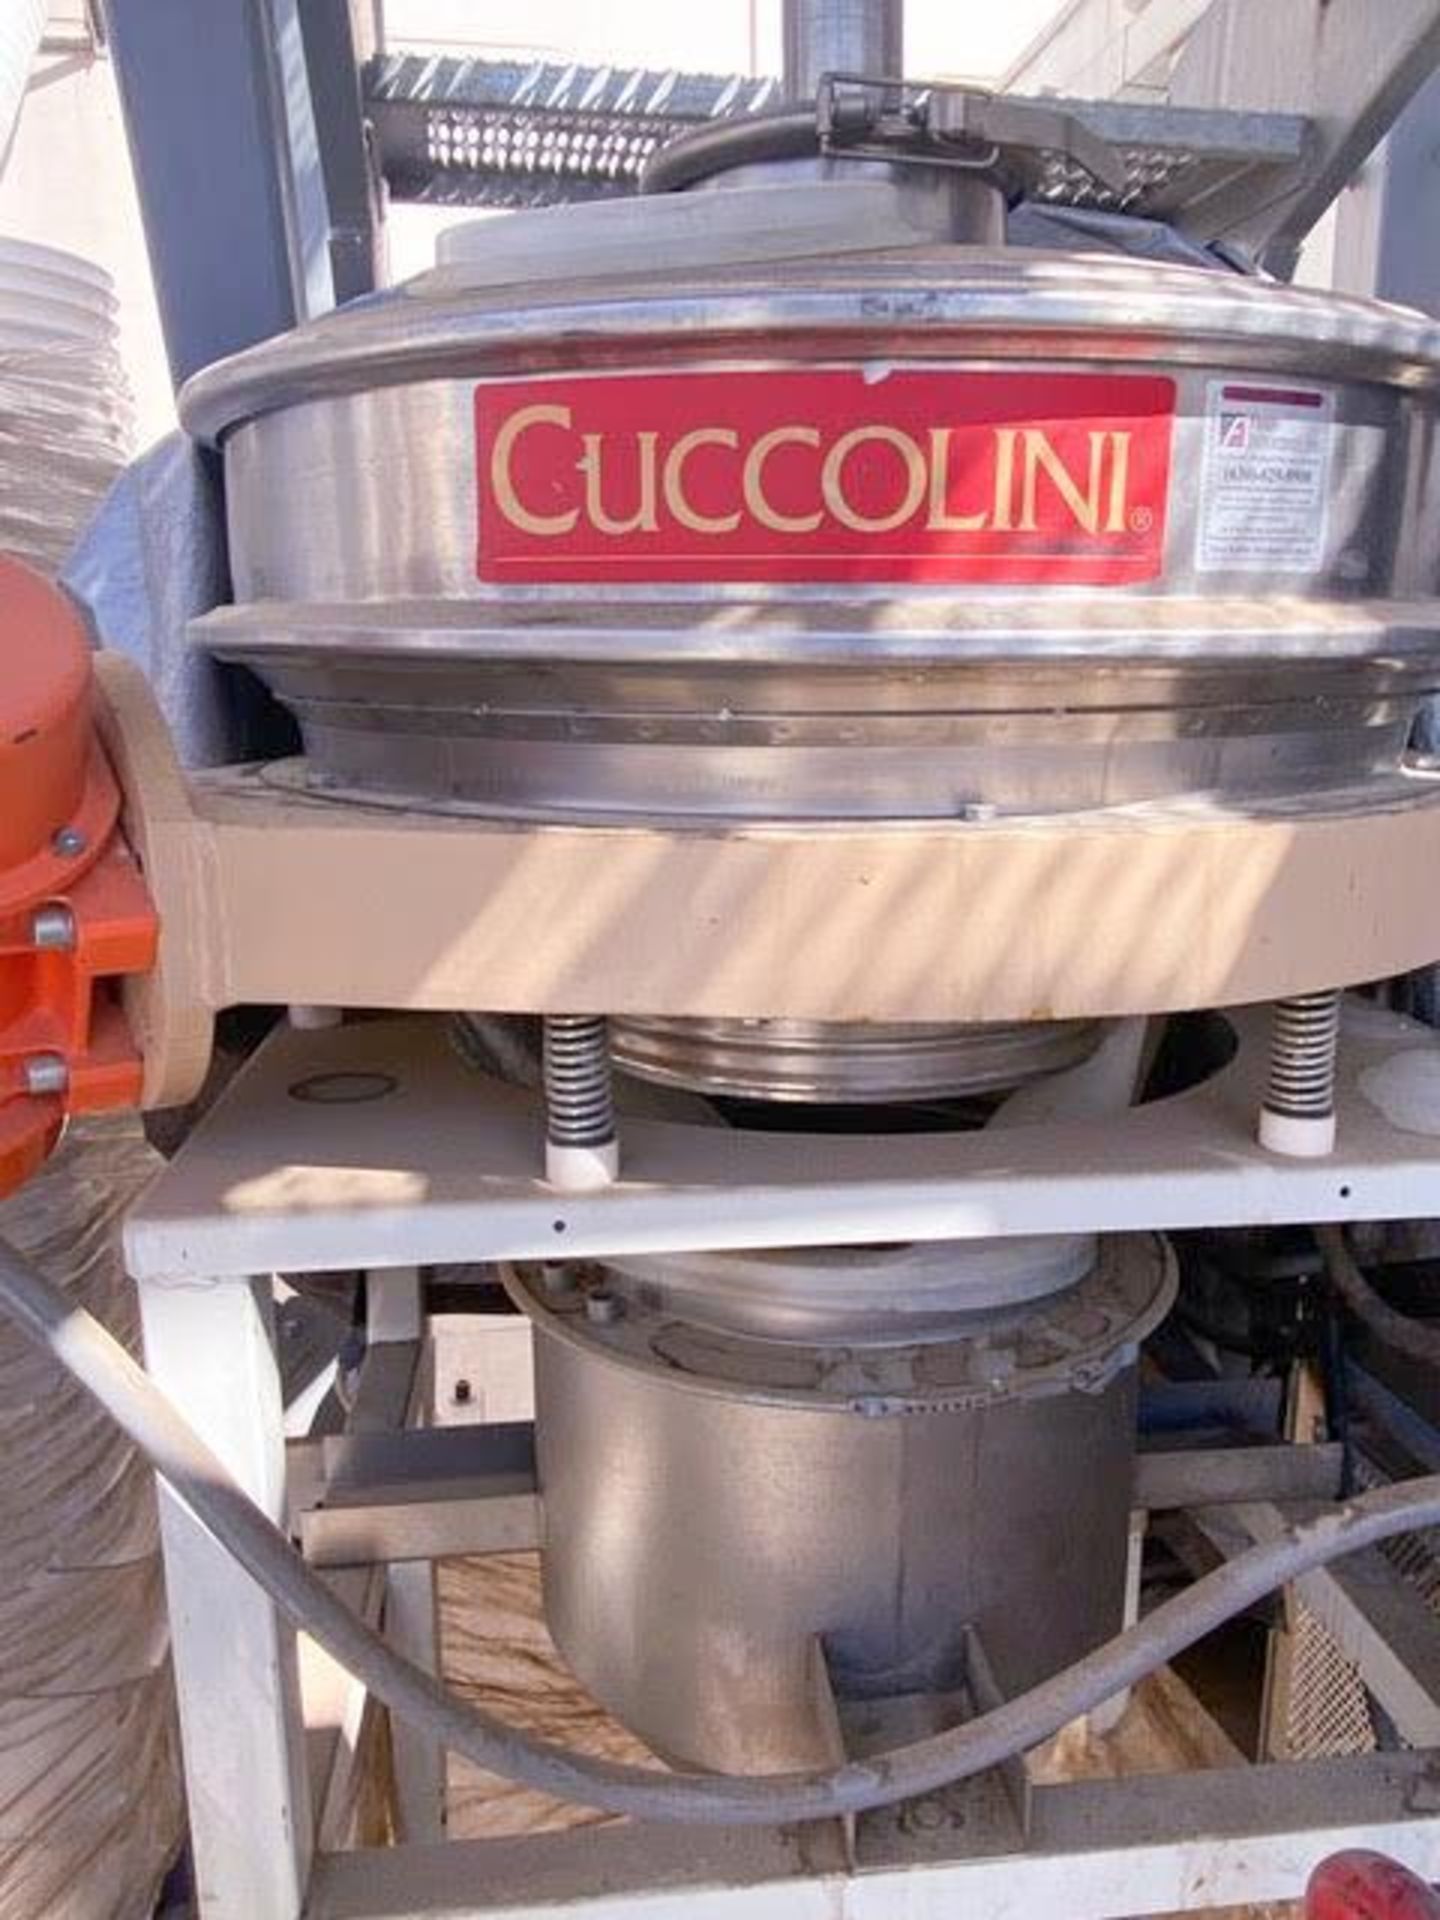 Cuccolini Sifter VP2 - Image 4 of 6